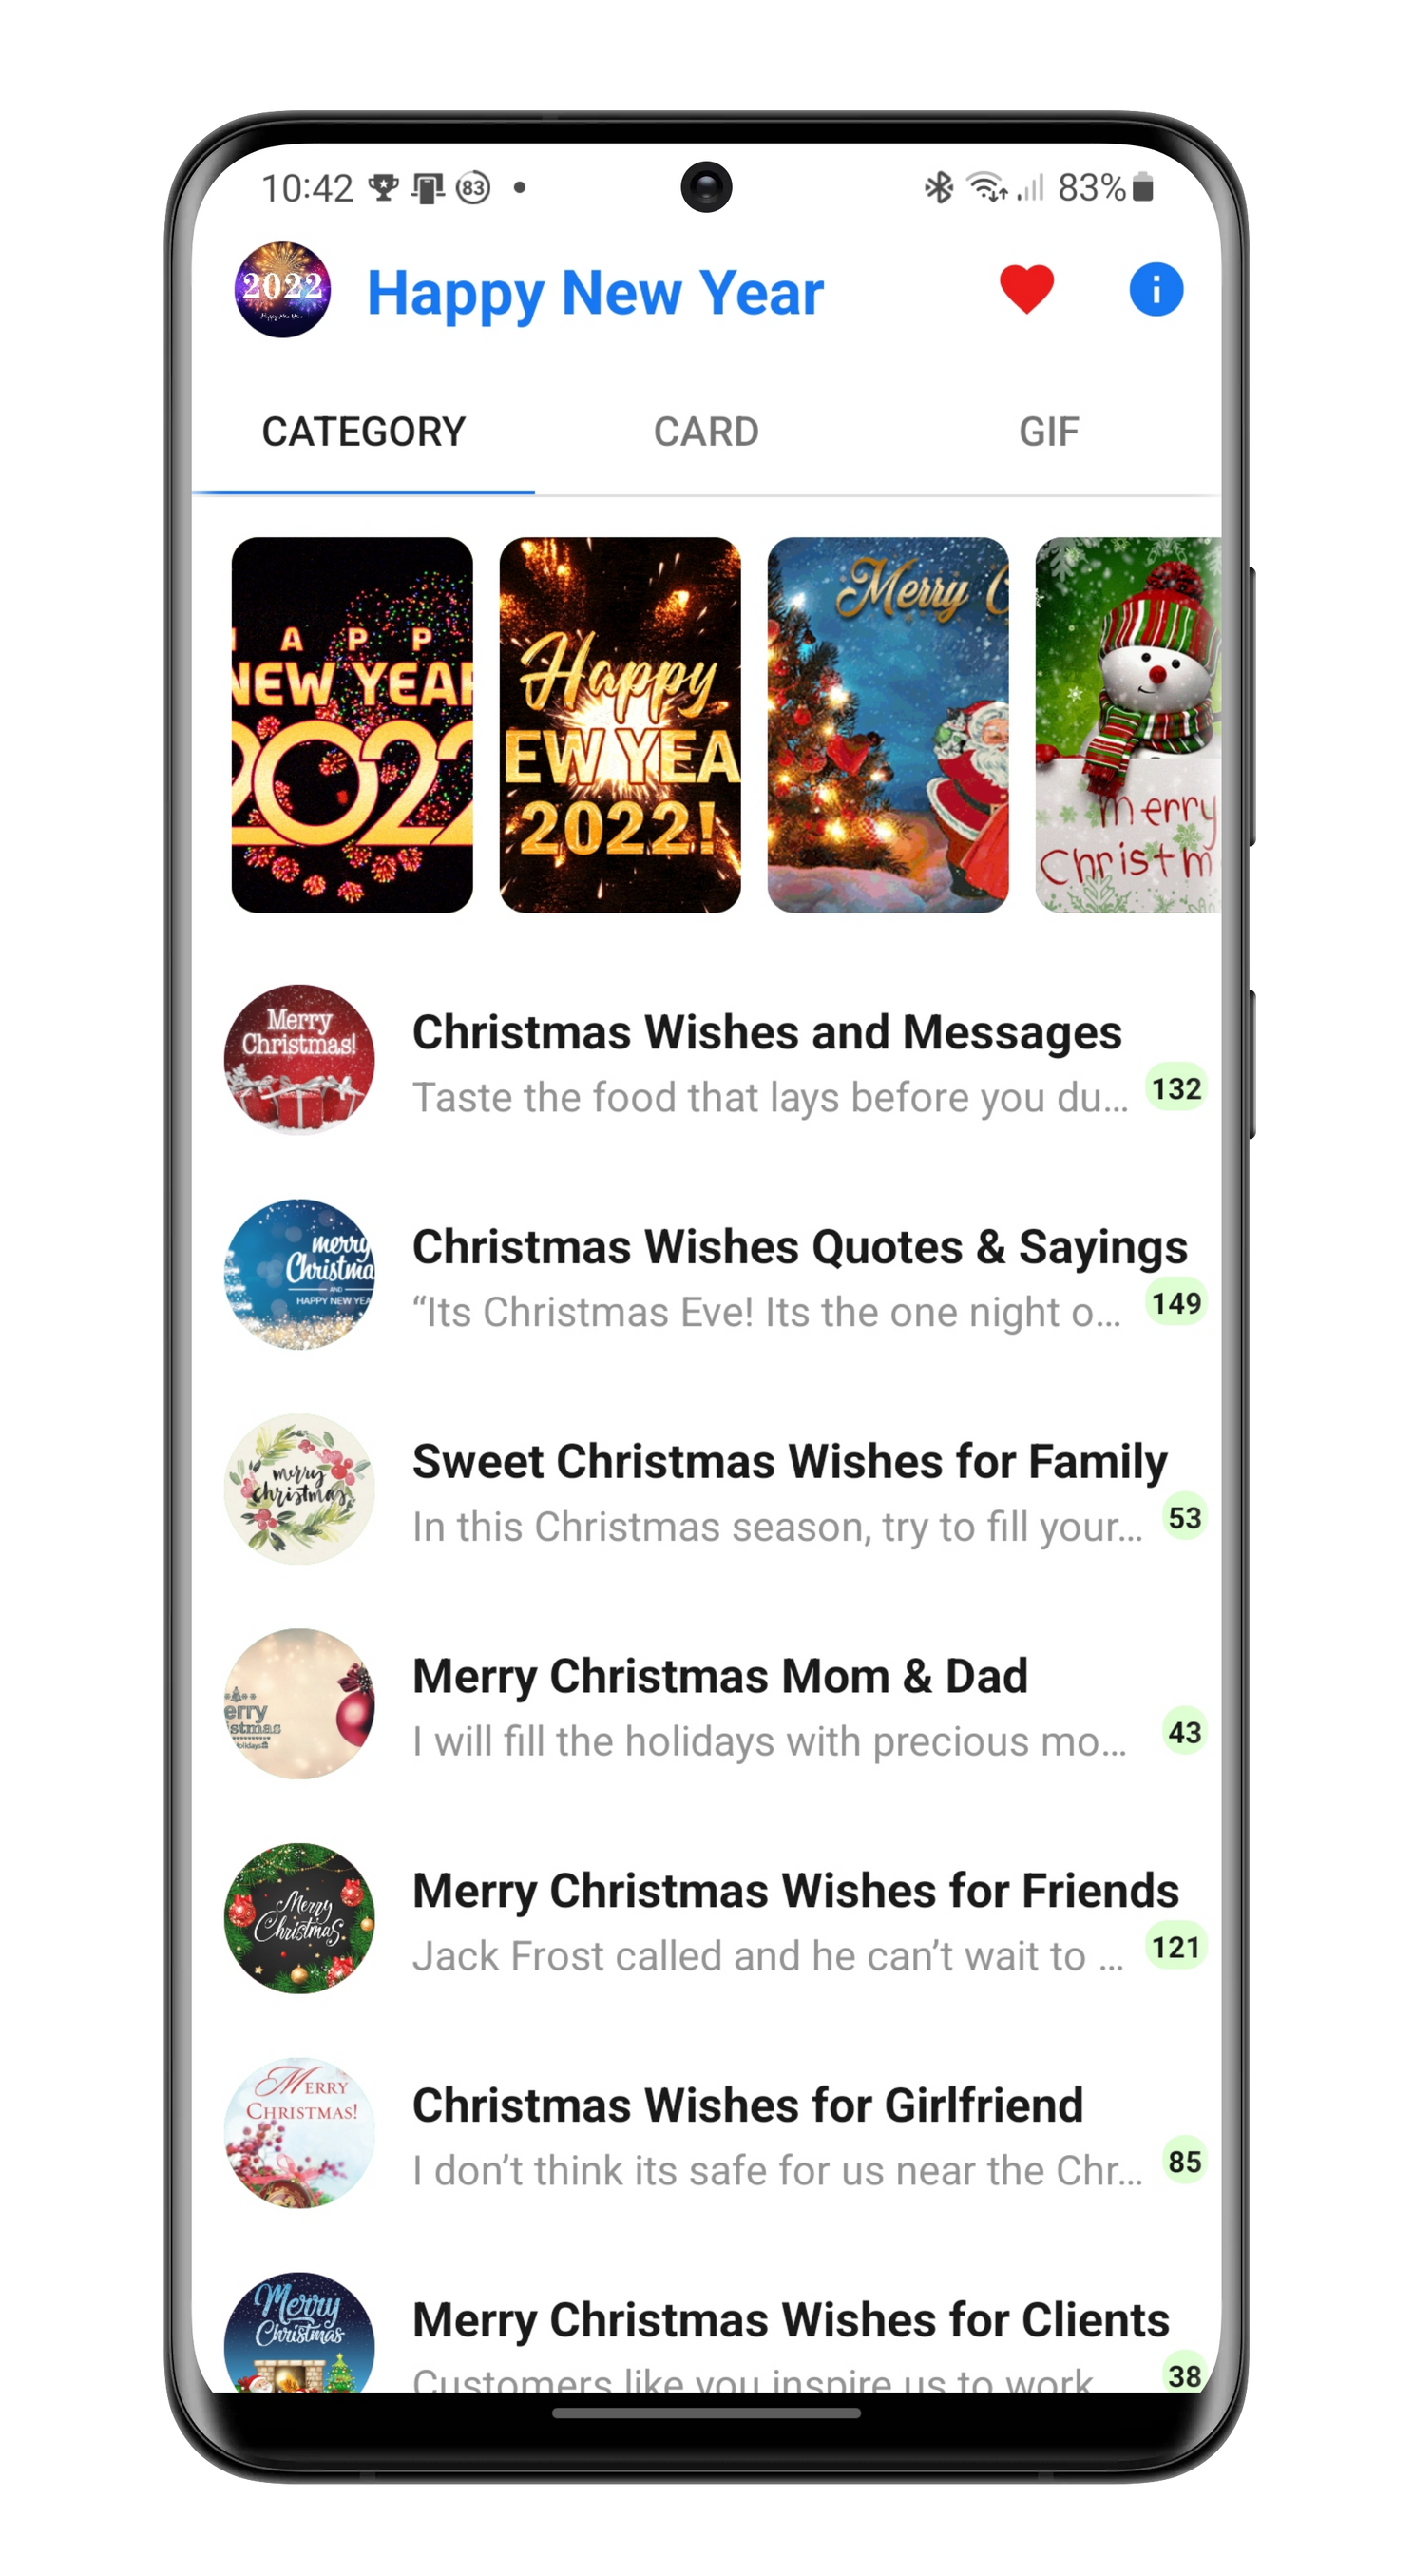 Send Christmas and New Year wishes via WhatsApp, all you need to know